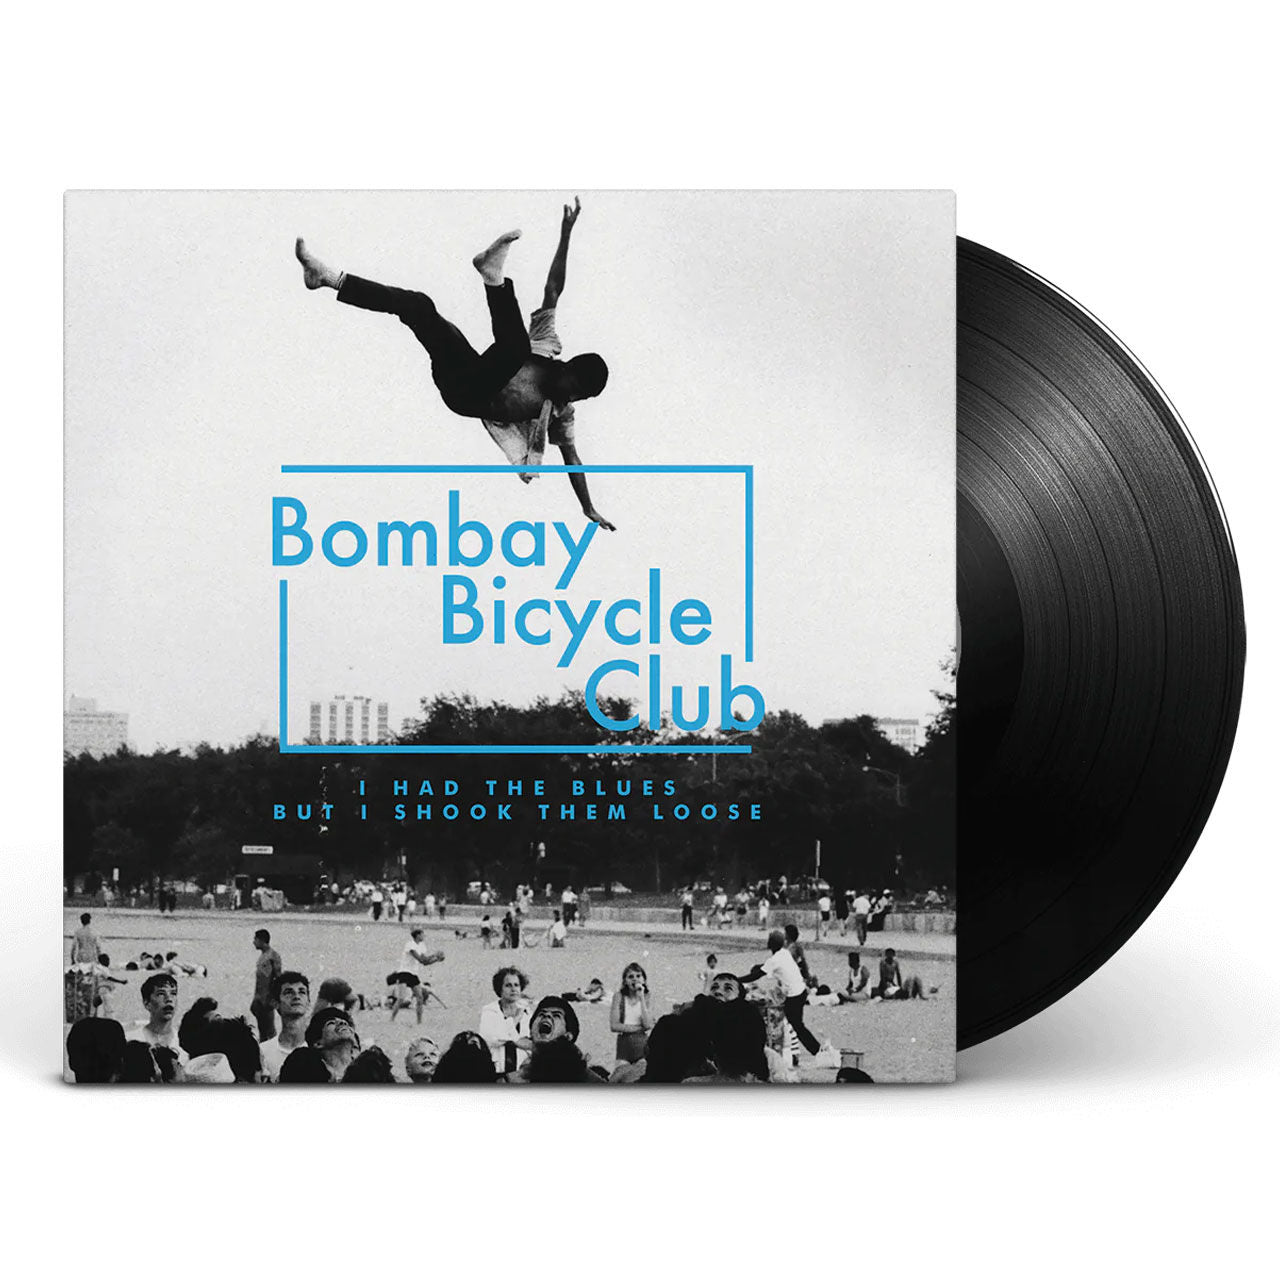 Bombay Bicycle Club - I Had The Blues, But I Shook Them Loose: Vinyl LP